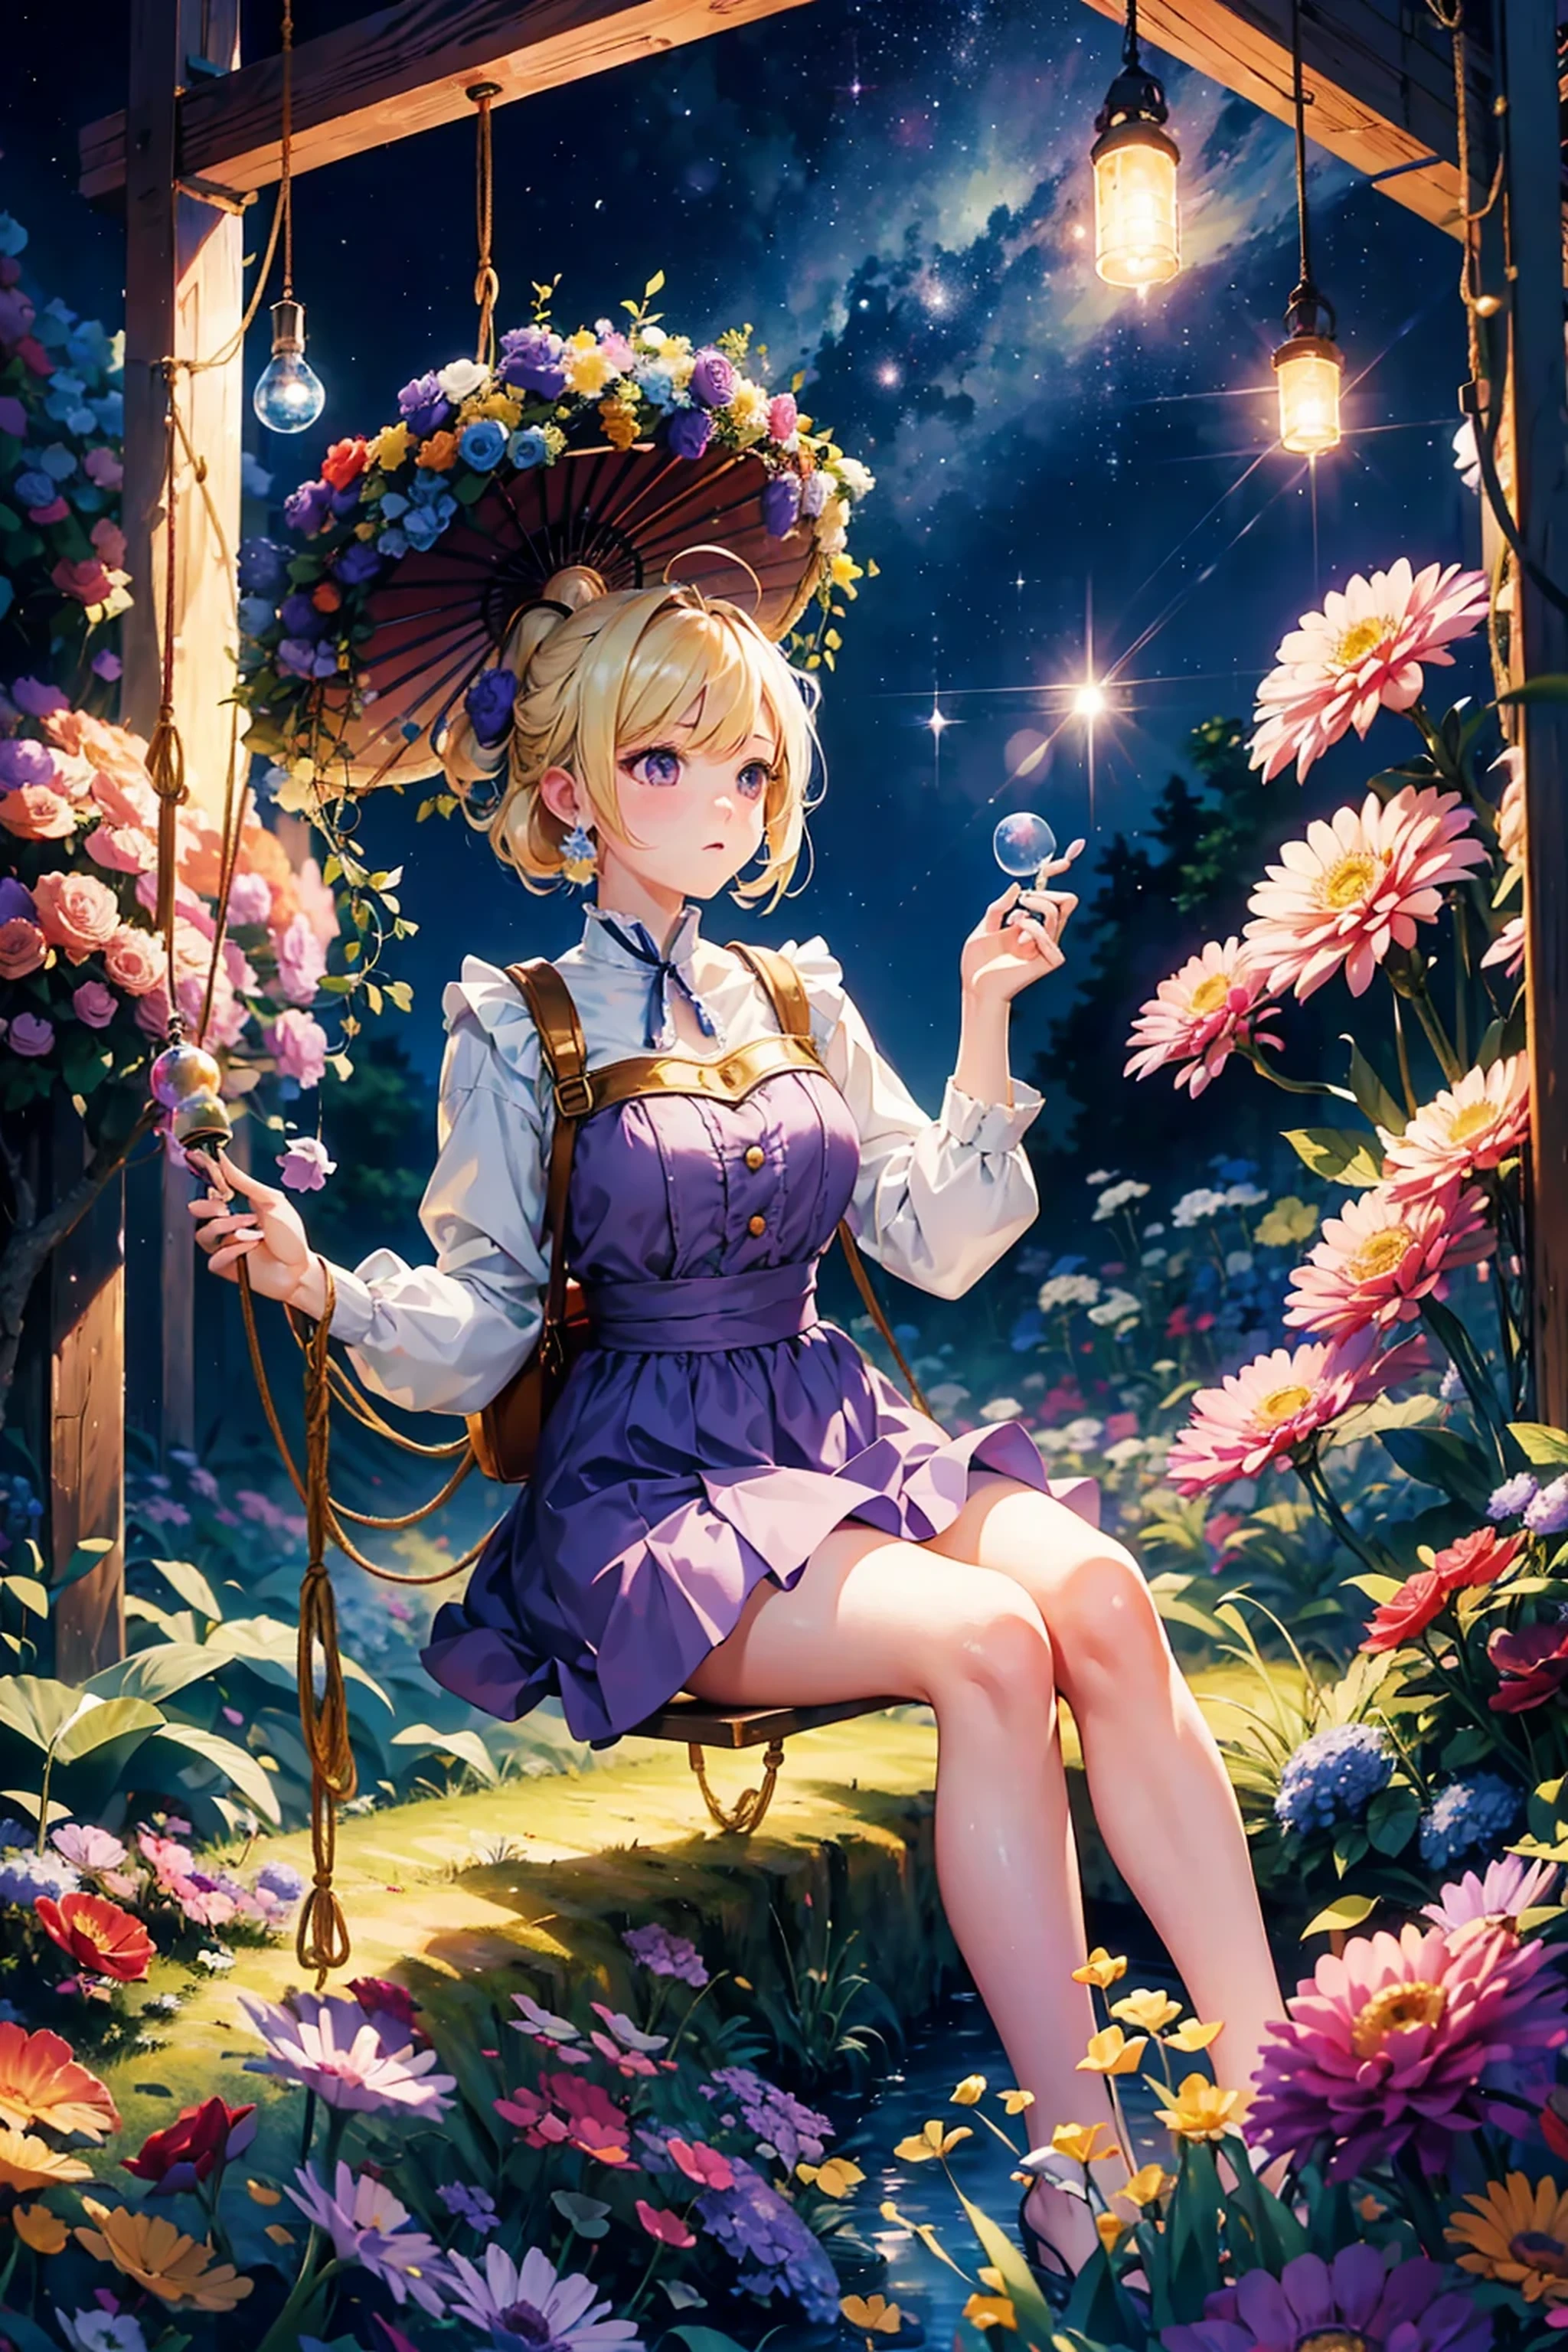 (Bright blonde hair:1.1, Anime style, girl, Purple eyes:1.1, froth, Starry Night:1.1) [Illustration, Vivid colors, hight resolution], (Ultra-detailed, photoRealistic, Realistic:1.37), (Best Quality, 4K, masutepiece:1.2), Joyful expression, Elegant costumes, Surrounded by colorful flowers, sitting on a swing in a green garden, Magical atmosphere, gentle wind, soft warm lighting, dreamy ambiance.